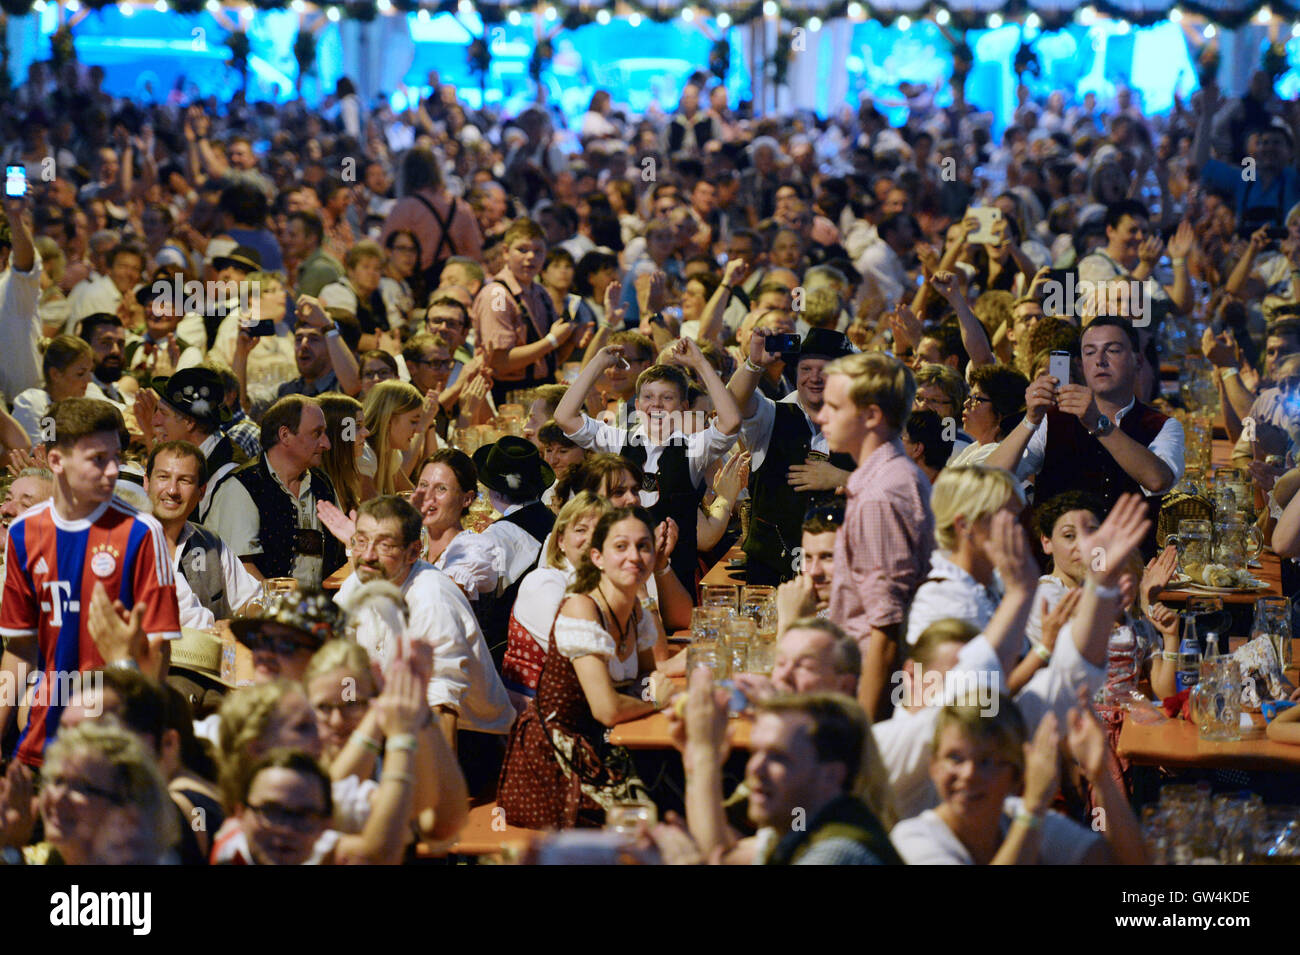 Beilngries, Germany. 11th Sep, 2016. Participants celebrating the result of the world record attempt in the festival tent at the folk festival in Beilngries, Germany, 11 September 2016. Beilngries secured an entry in the Guinnes World Records book with 3,414 people wearing traditional costumes in a festival tent. PHOTO: ANDREAS GEBERT/dpa/Alamy Live News Stock Photo